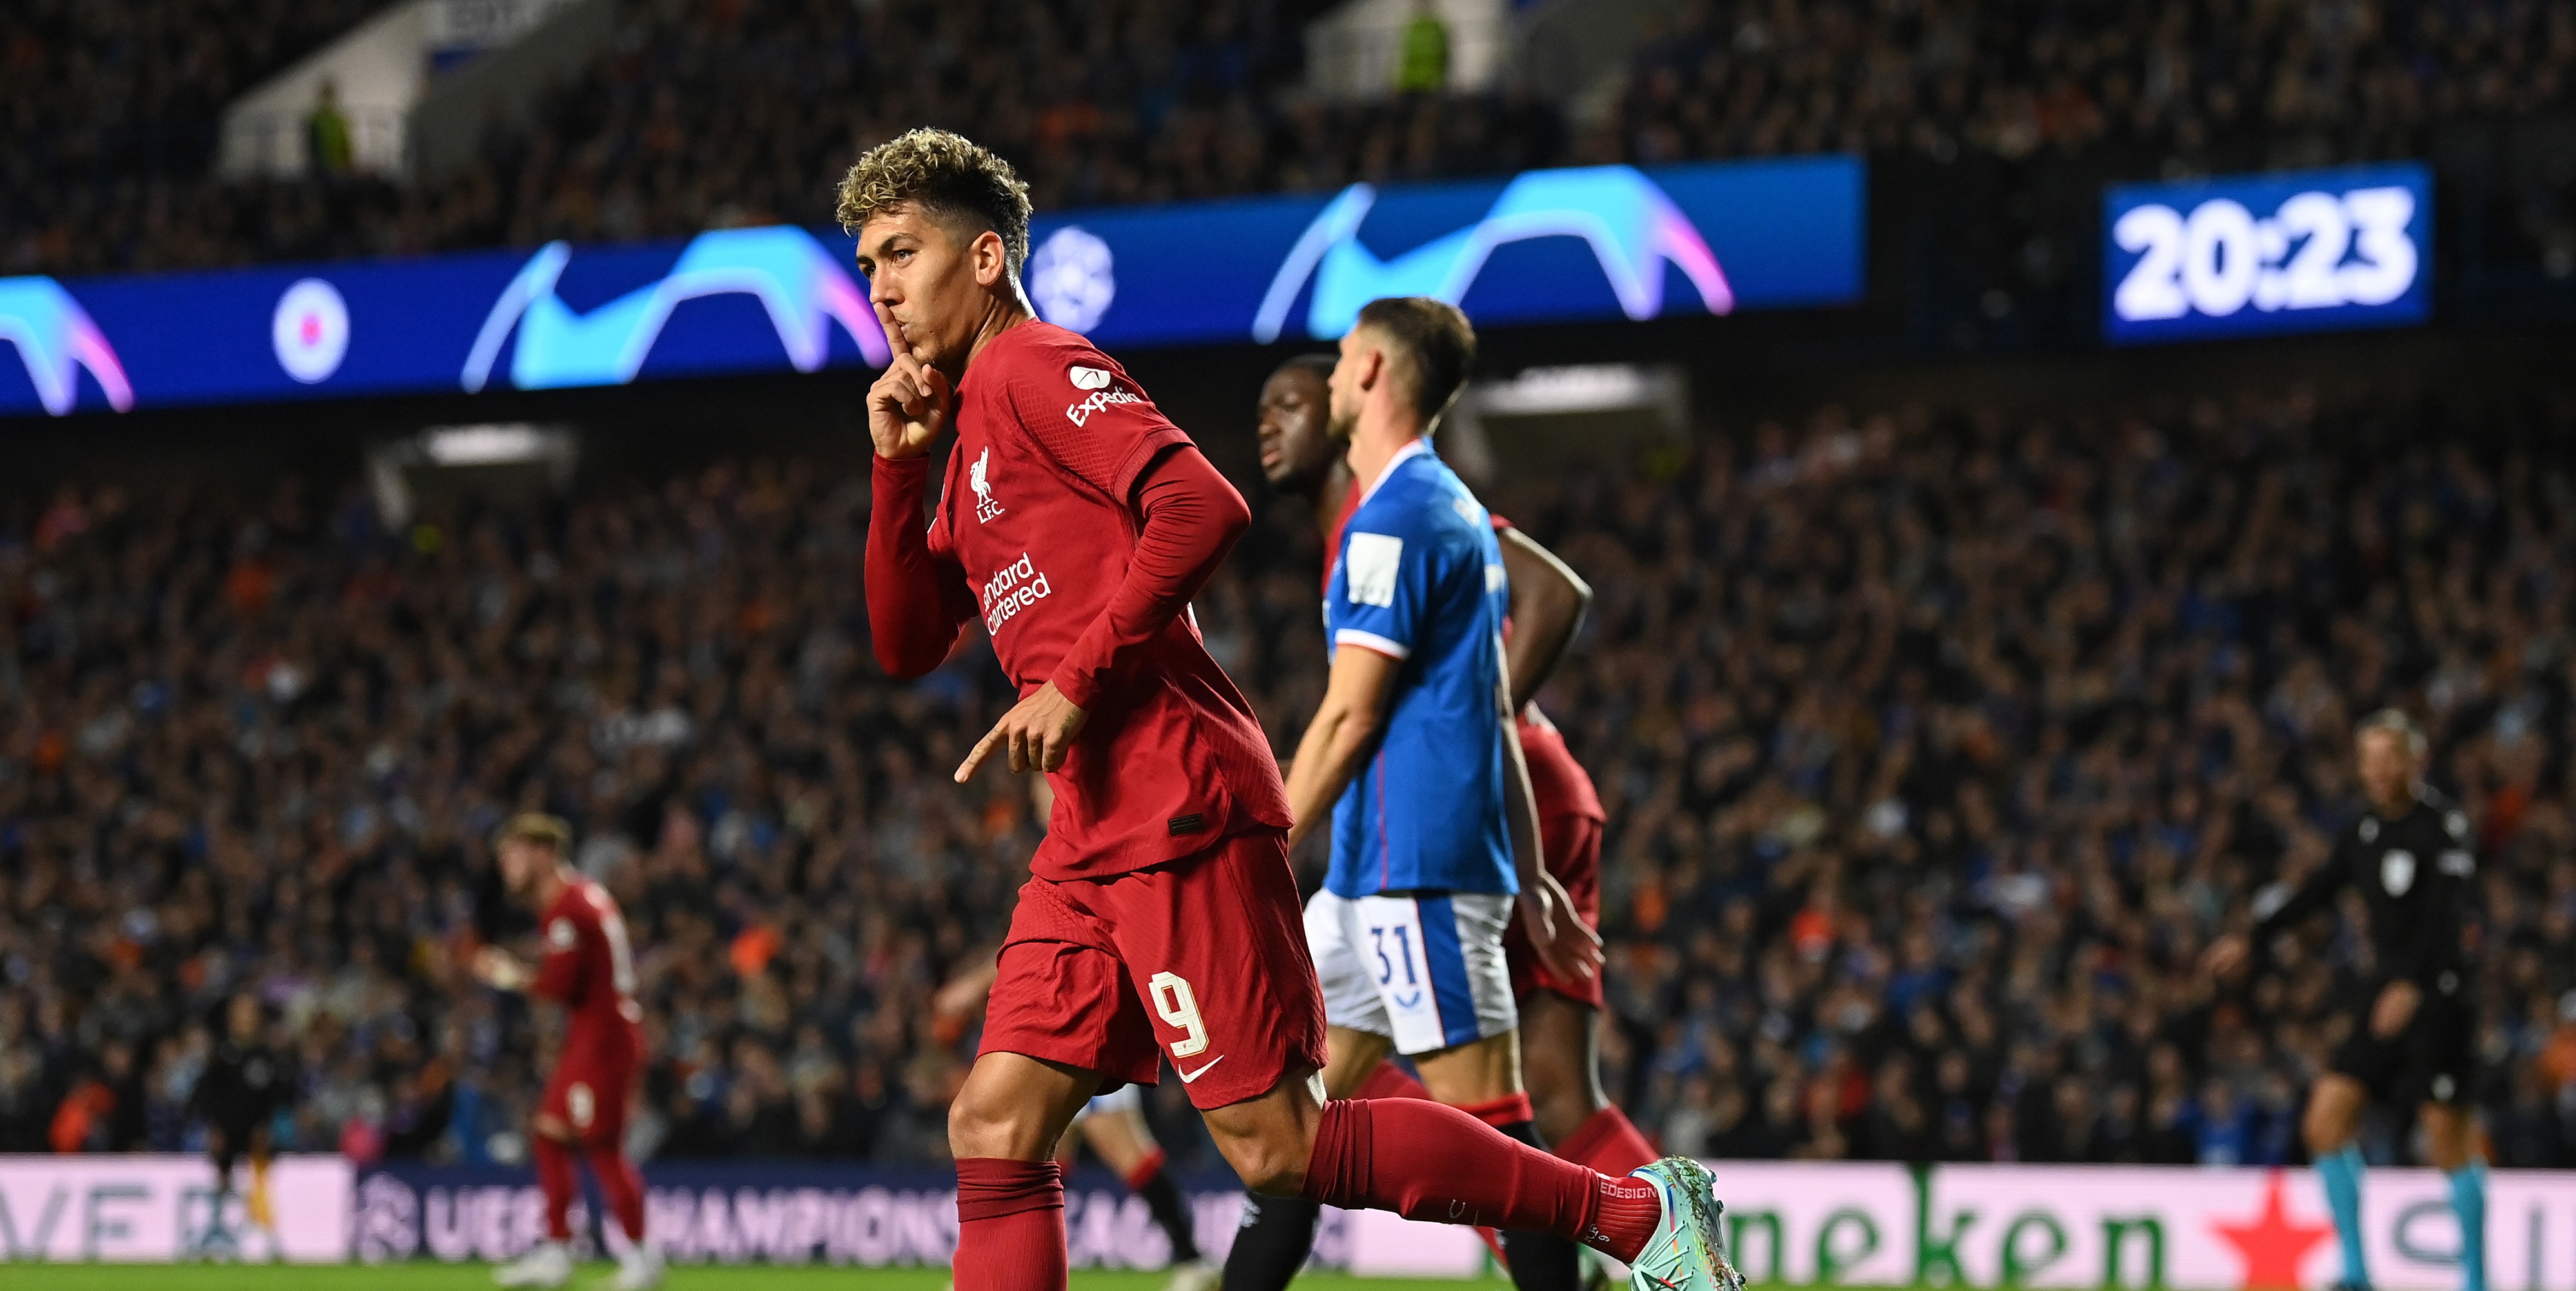 Bobby Firmino admits he’s ‘happy’ and ‘intends to stay’ at Liverpool as he approaches final six months of current Reds deal